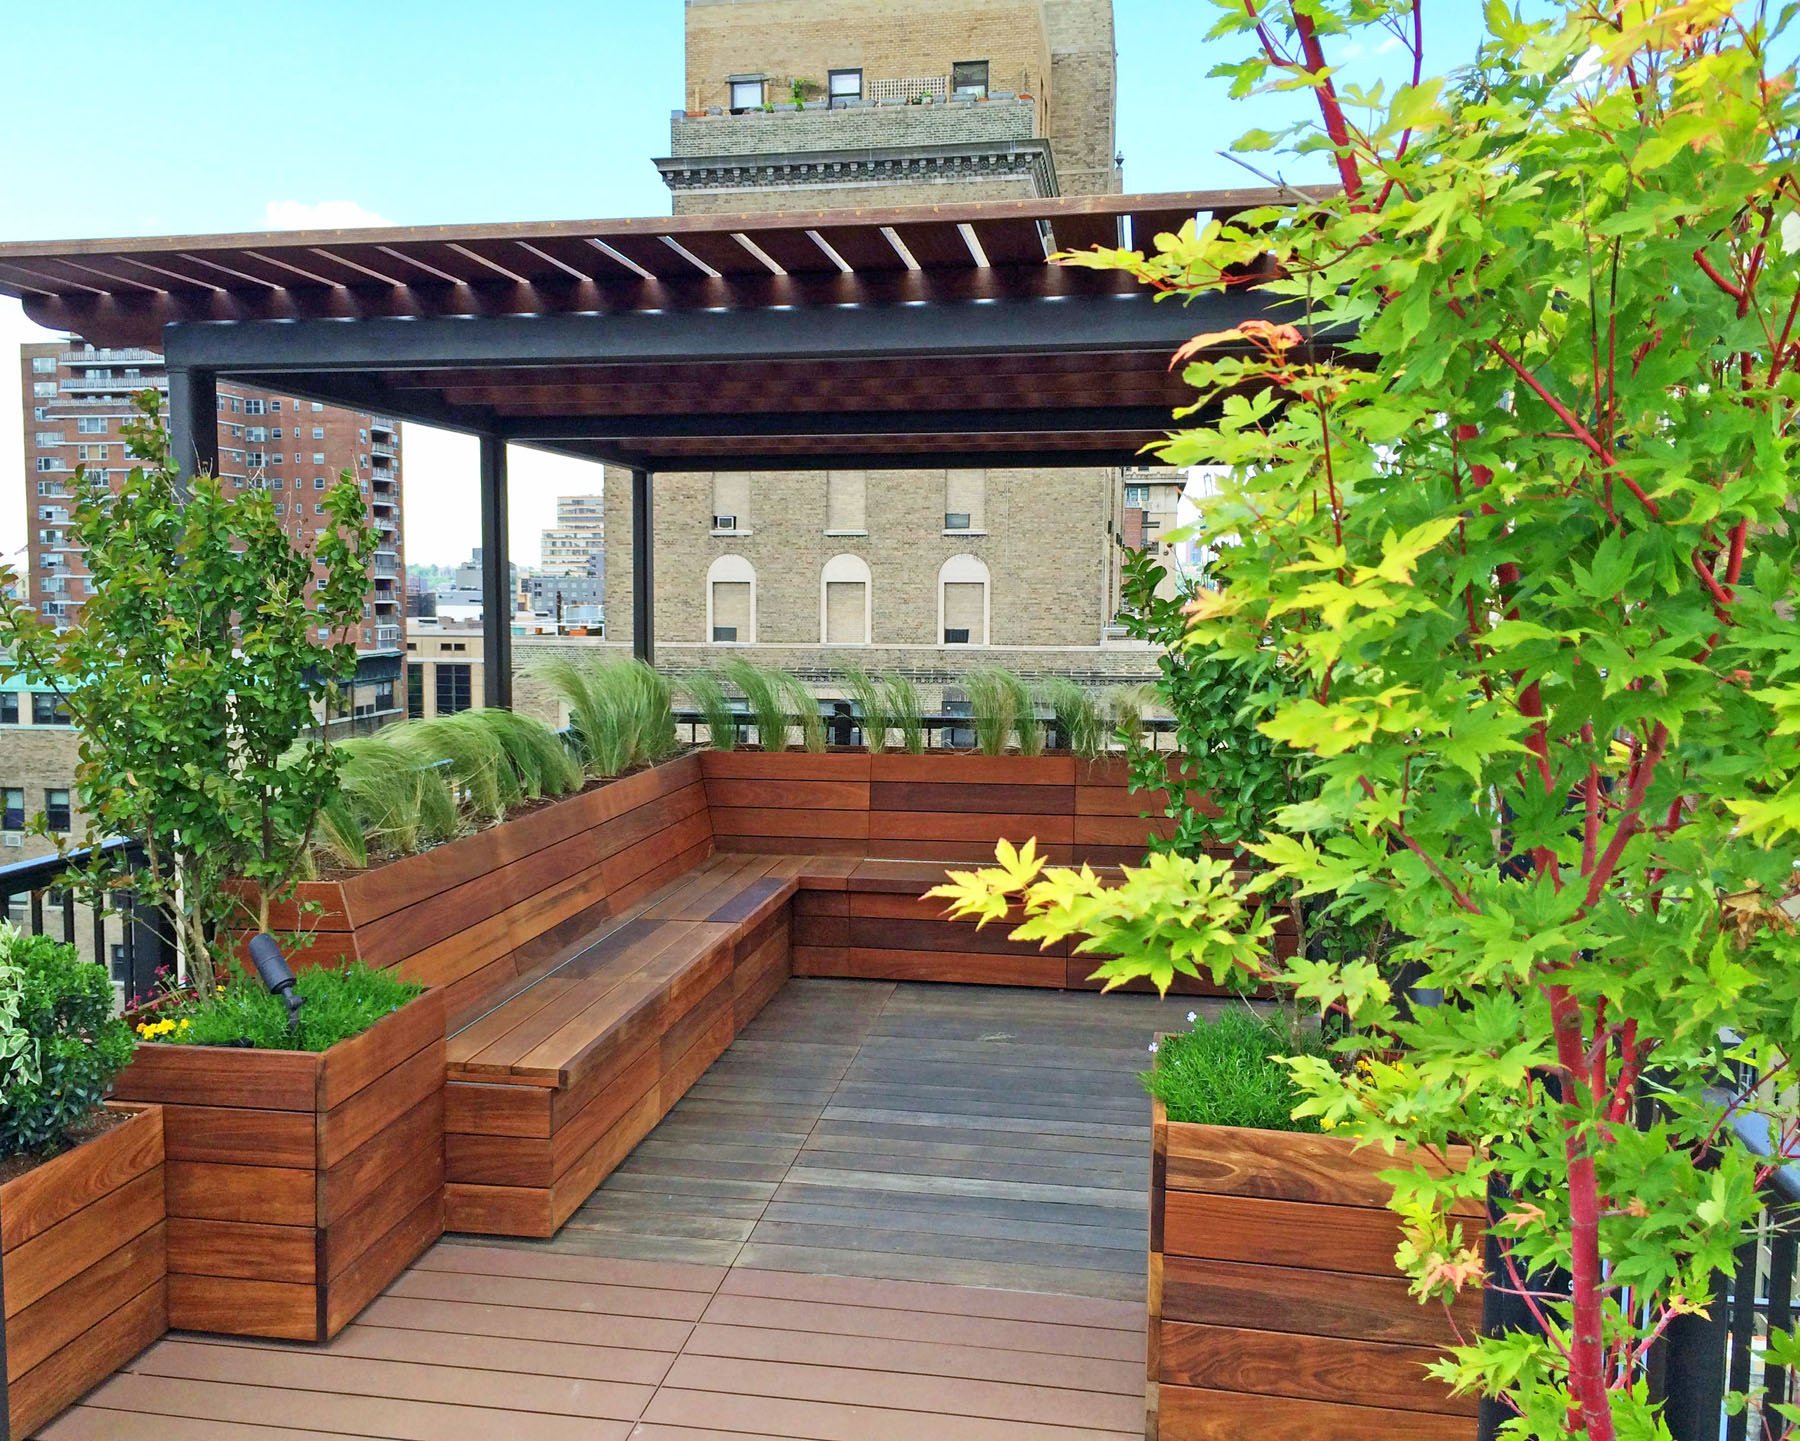 Make the most of your rooftop garden with these design tips